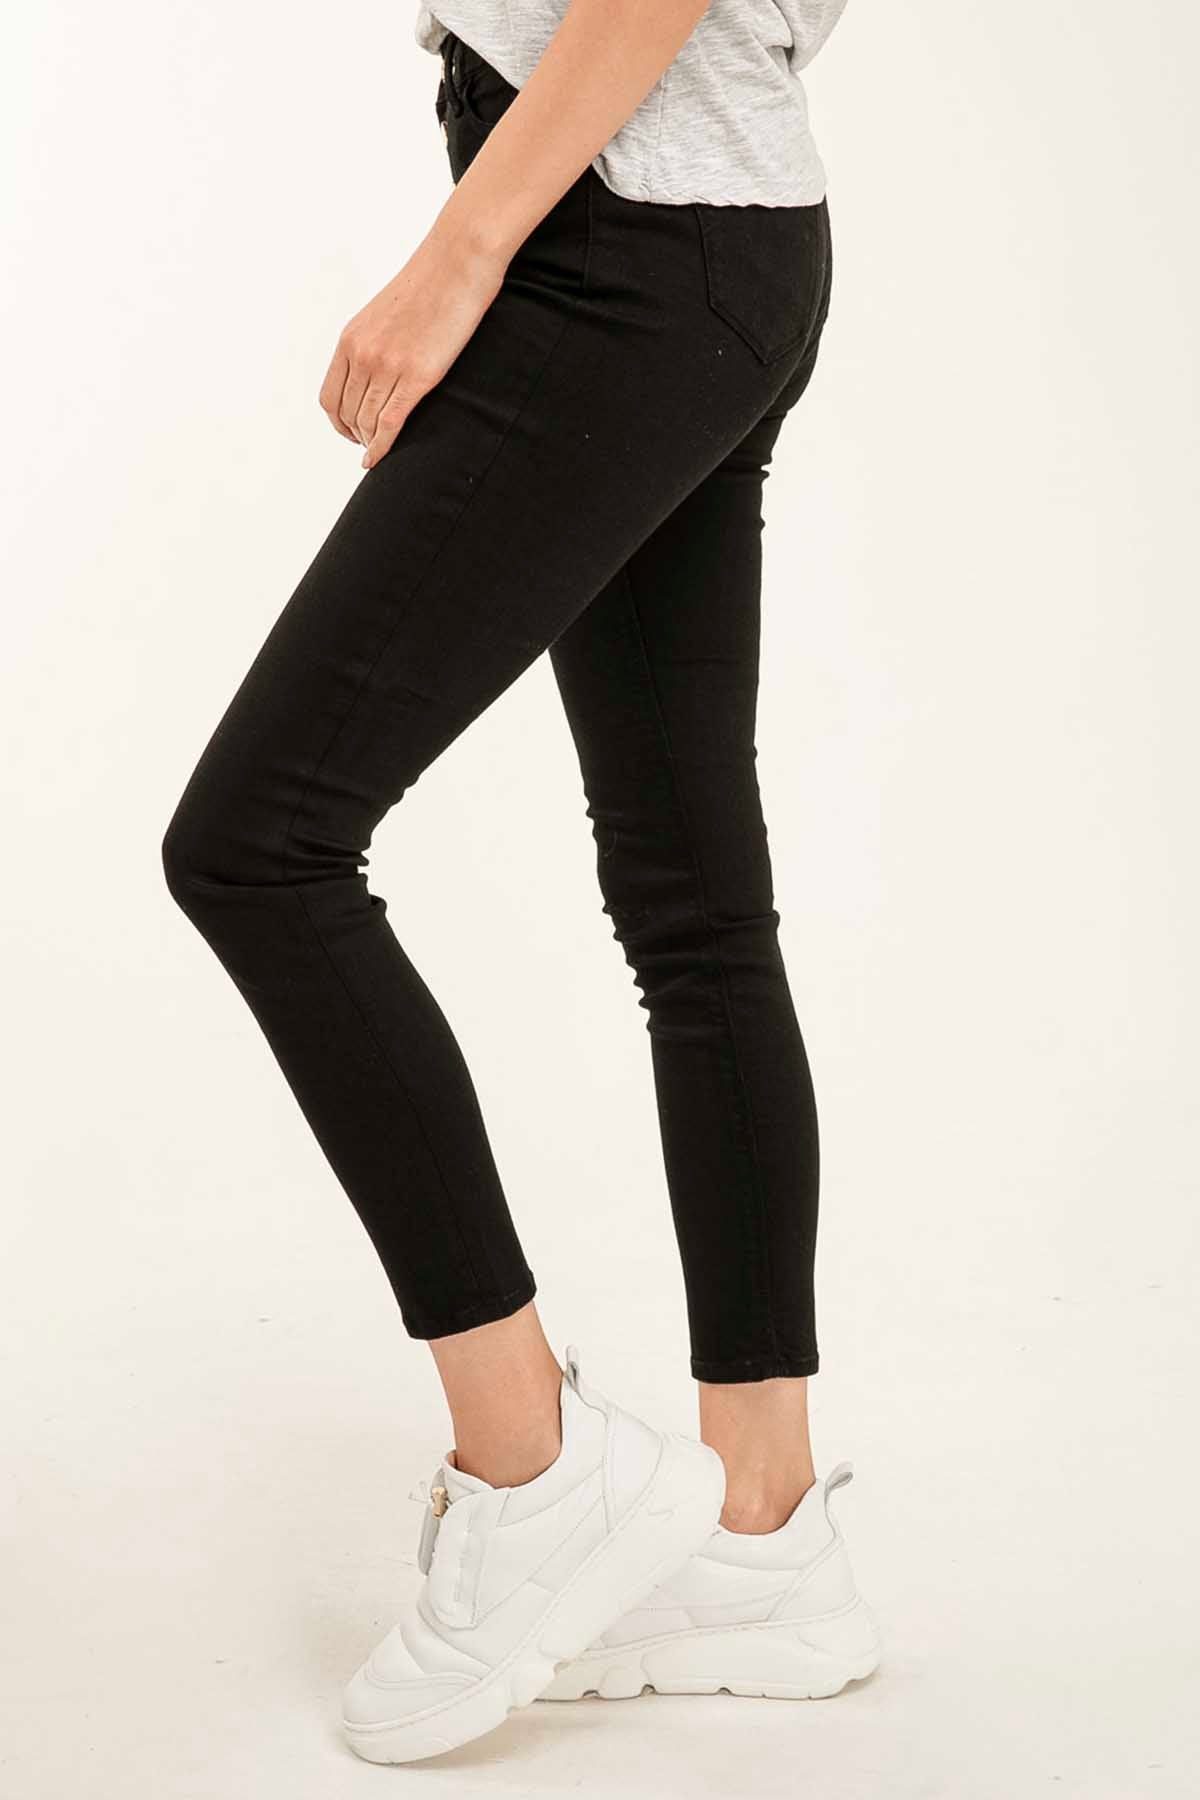 Replay Luzien Skinny High Waist Fit Jeans-Libas Trendy Fashion Store